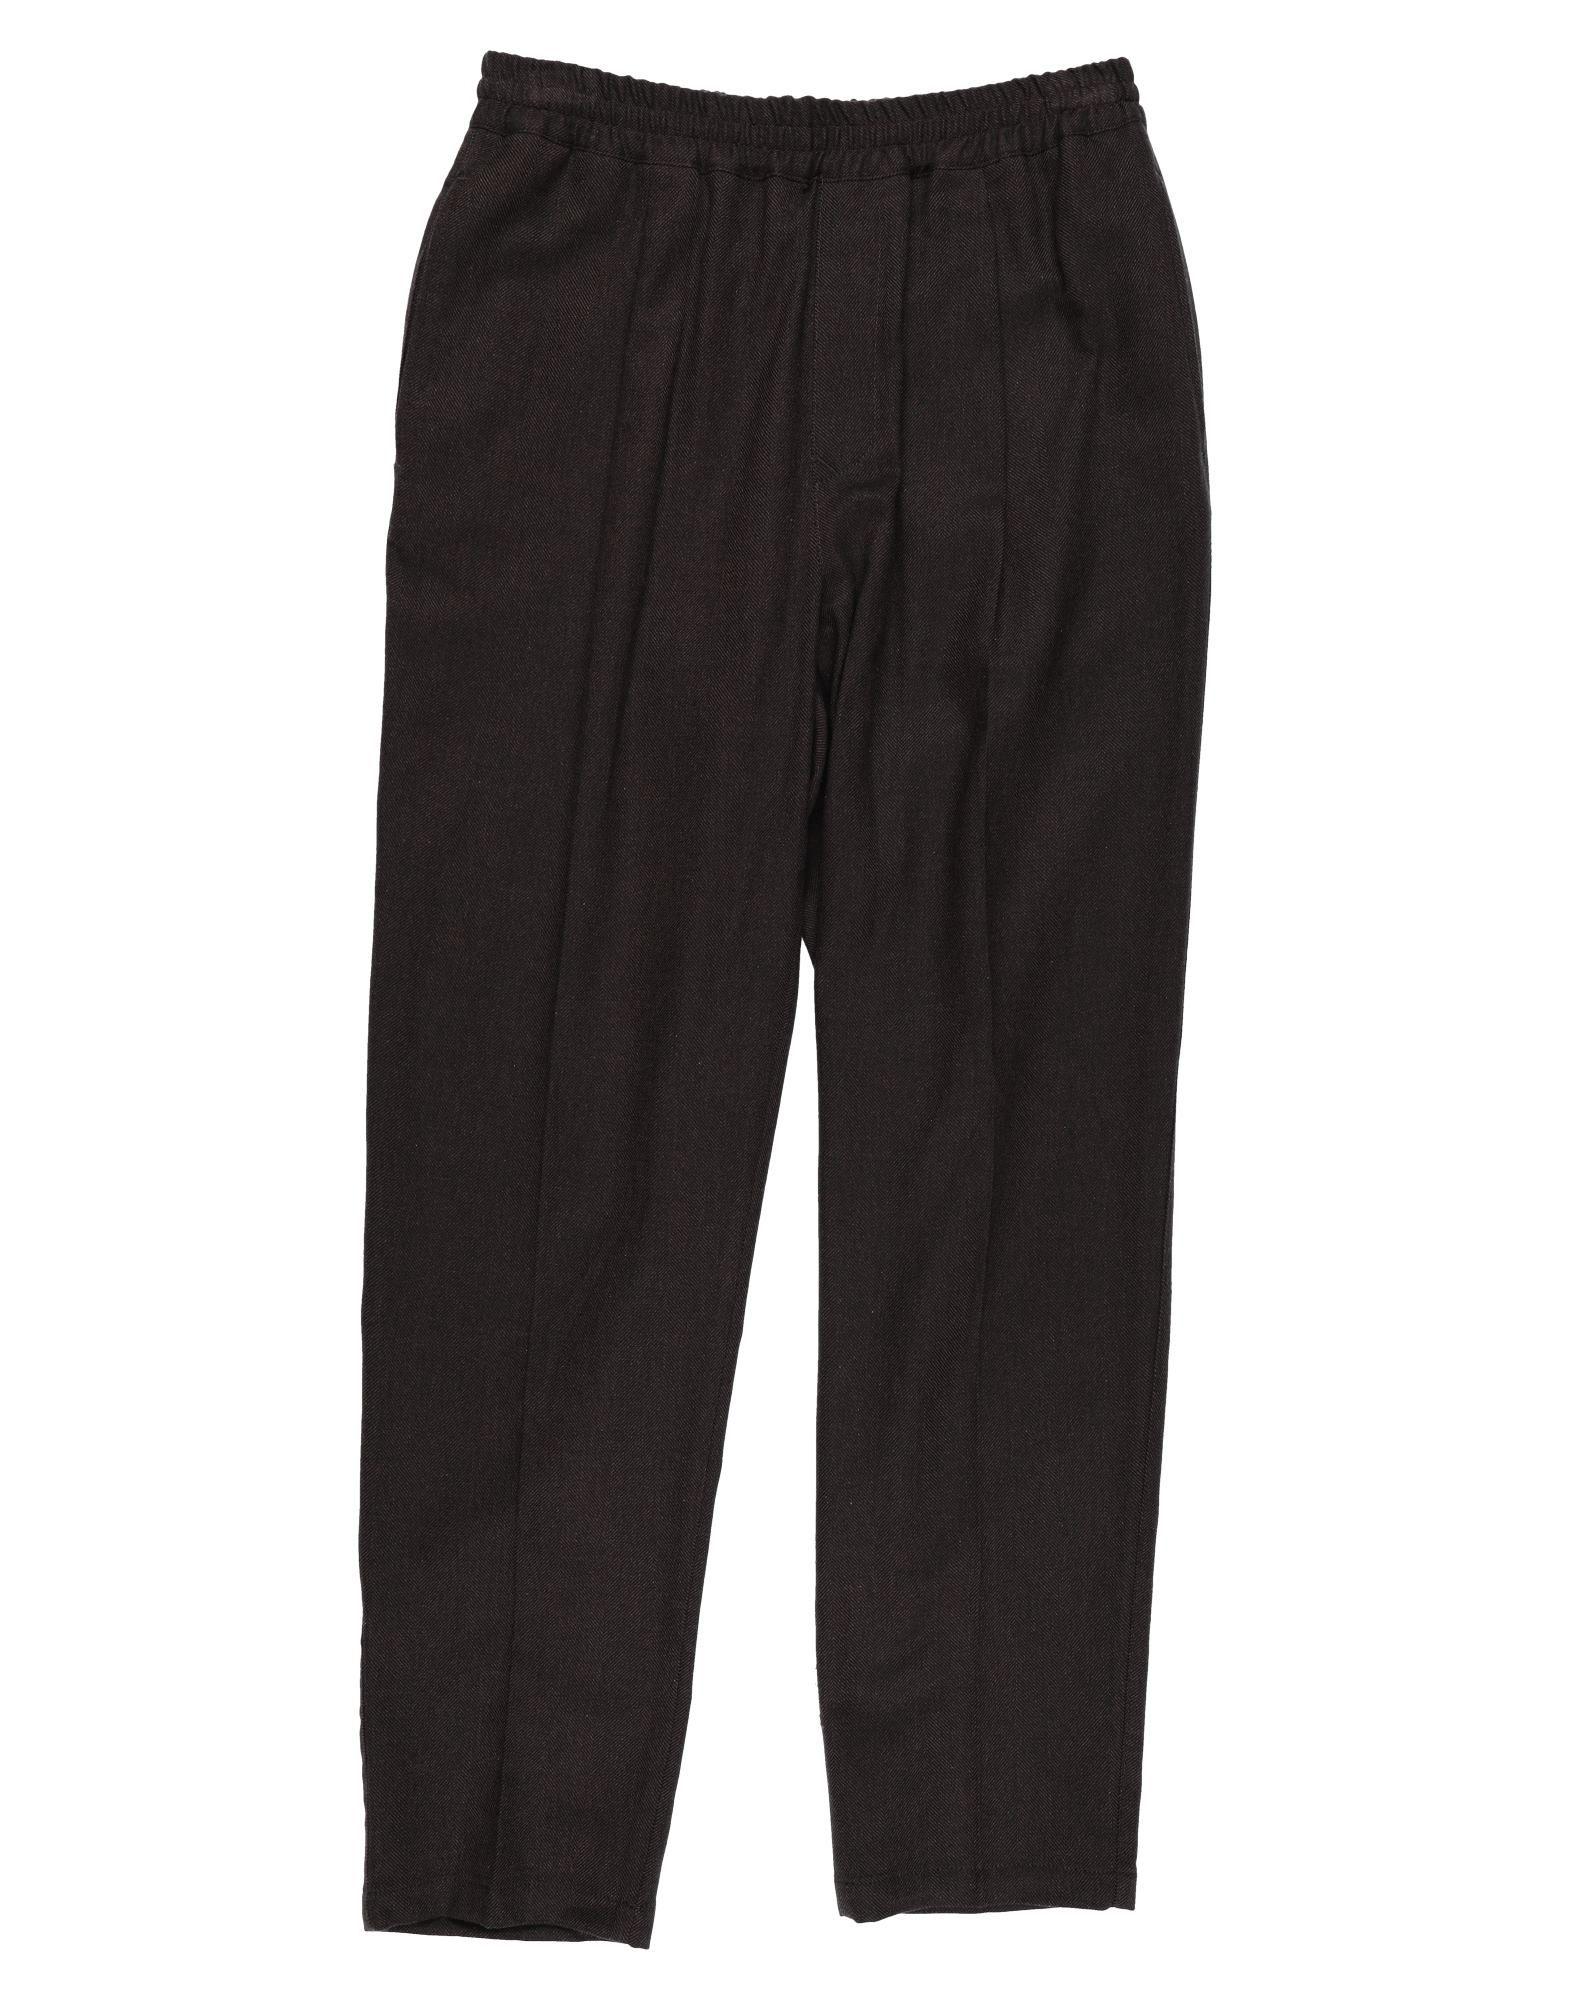 The Gigi Flannel Casual Pants in Dark Brown (Brown) for Men - Lyst